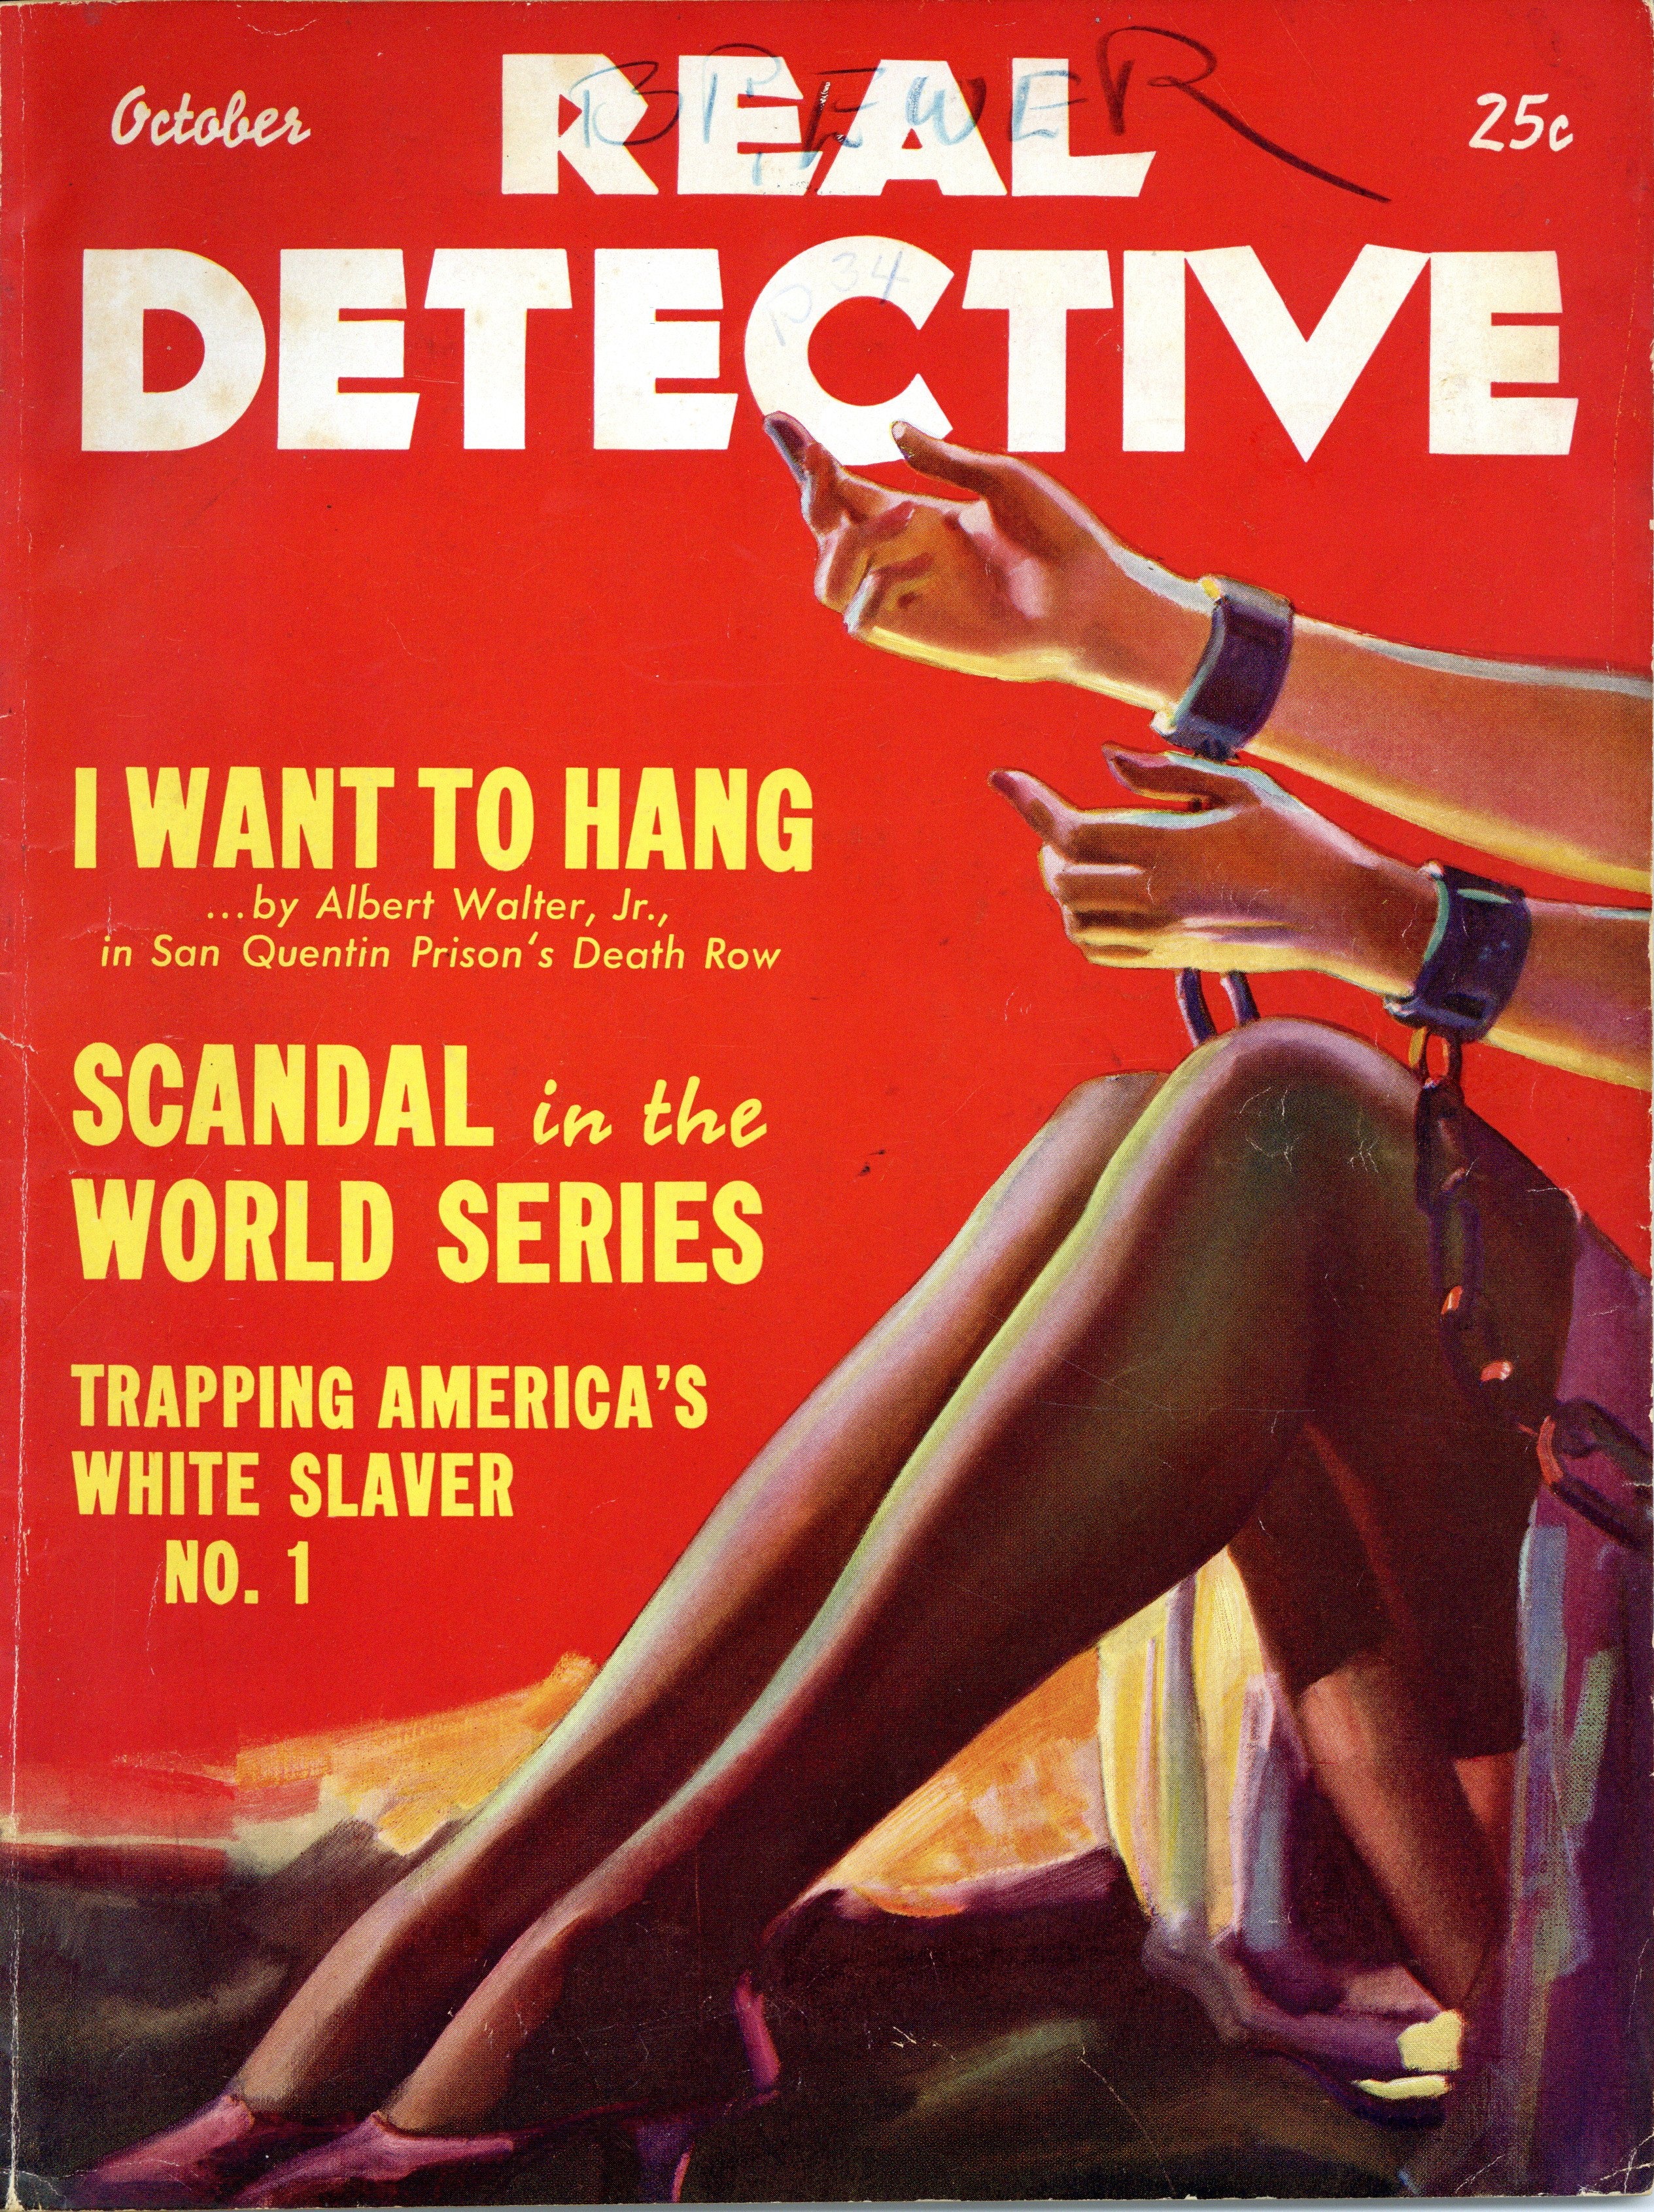 Real Detective October 1936